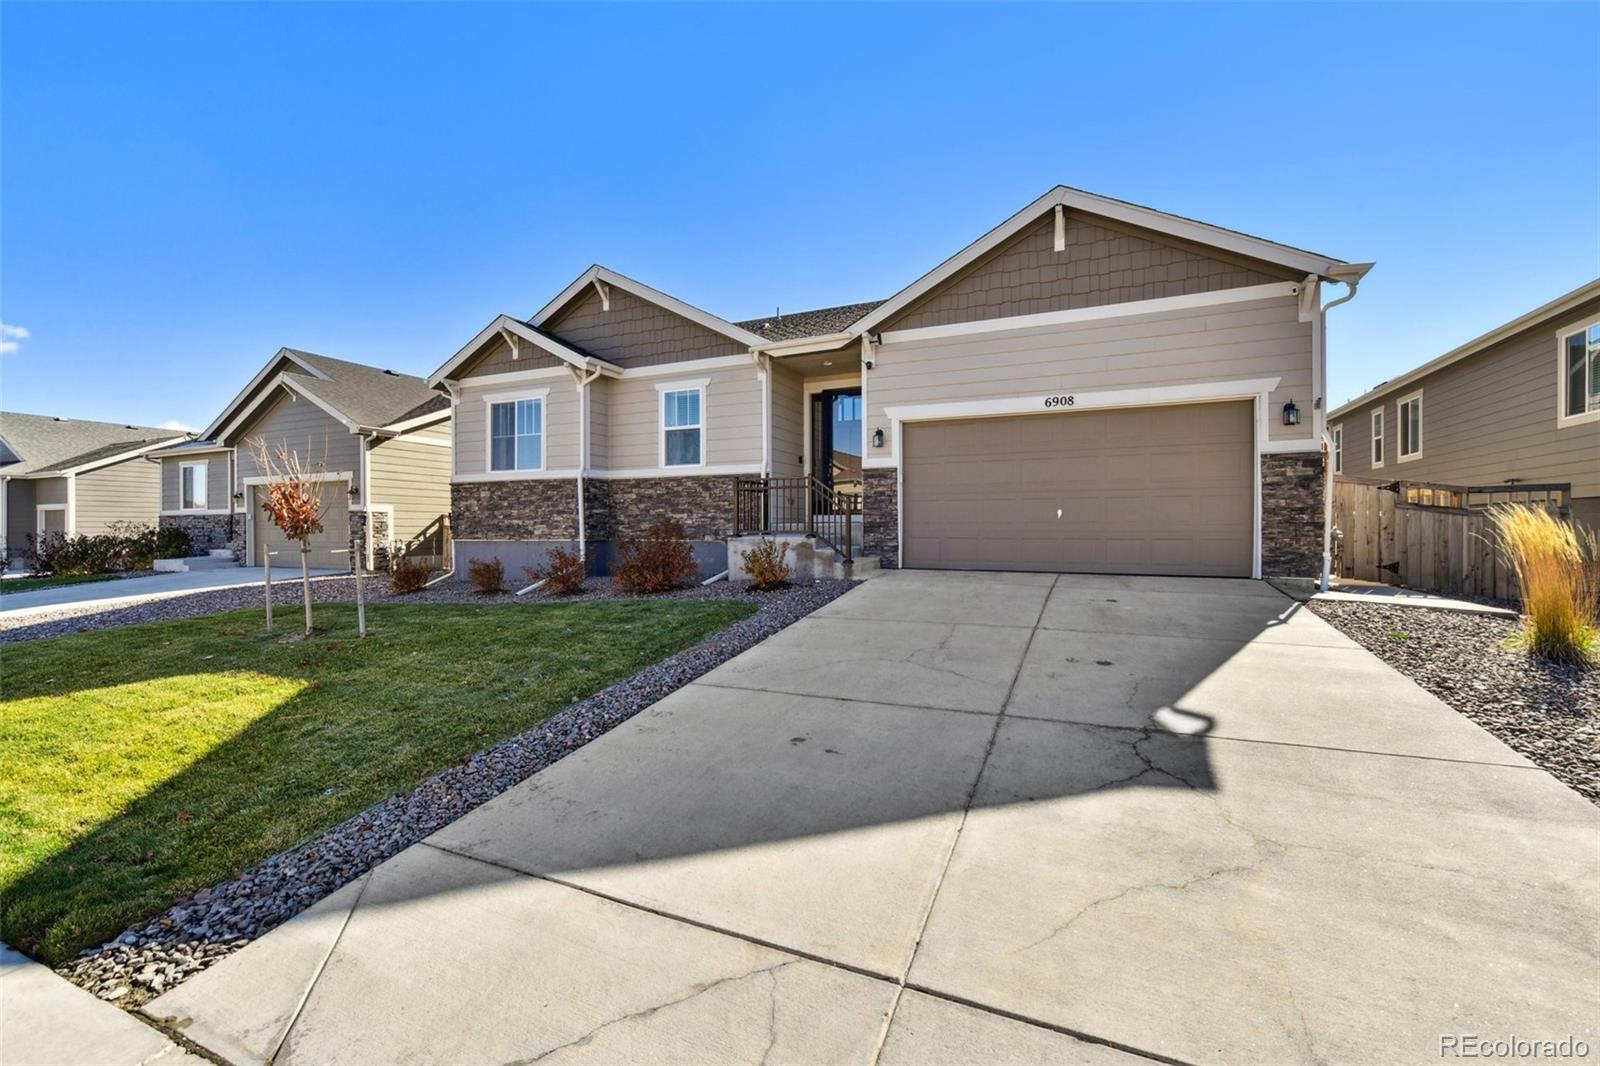 6908  greenwater circle, castle rock sold home. Closed on 2024-04-22 for $790,000.